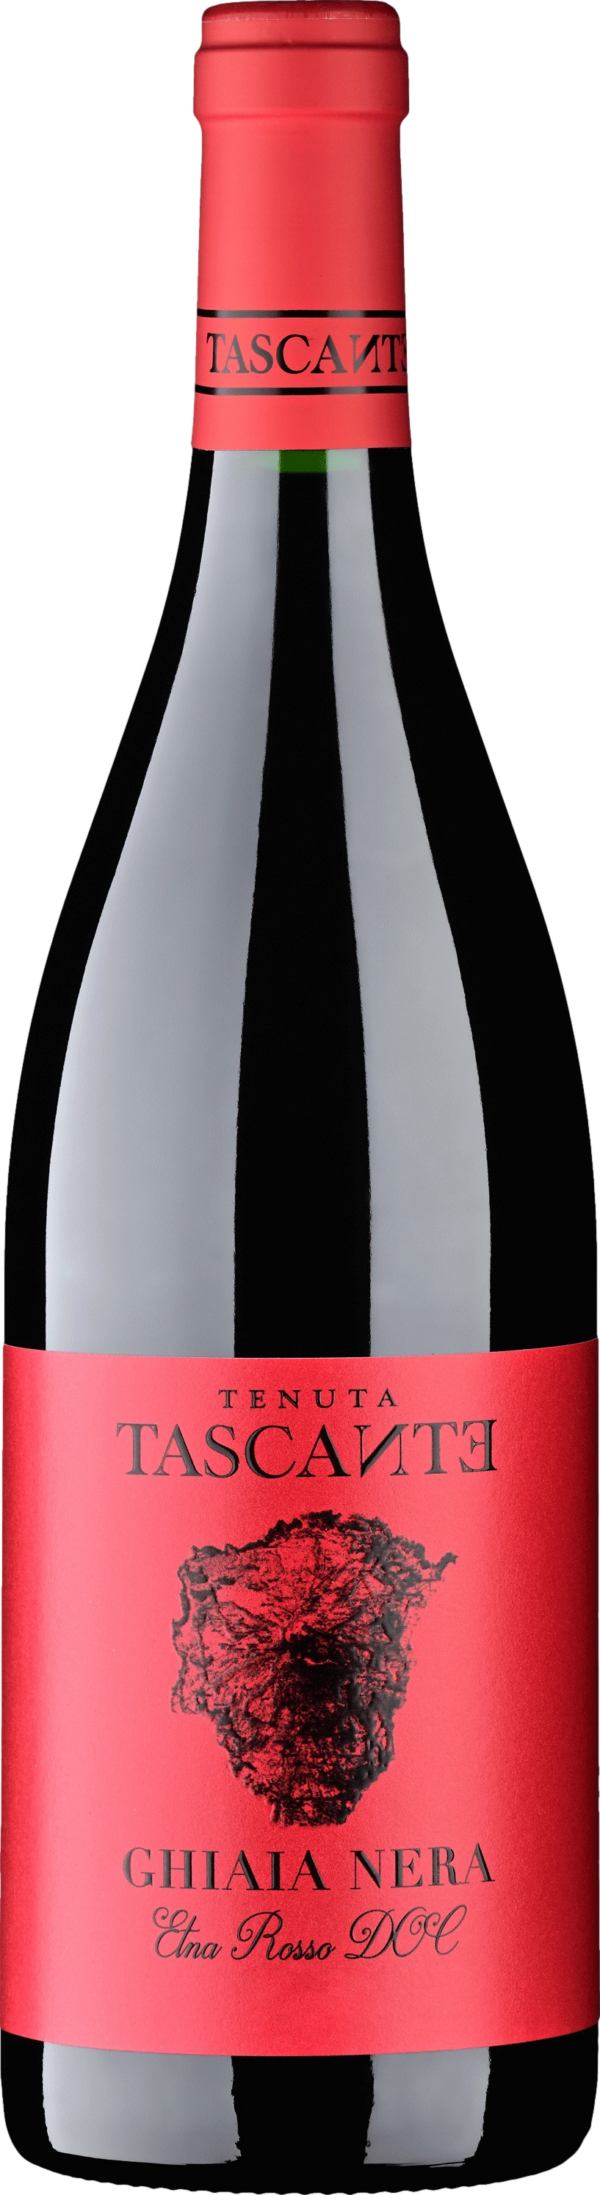 Product image of Tenuta Tascante Ghiaia Nera Etna Rosso 2018 from 8wines